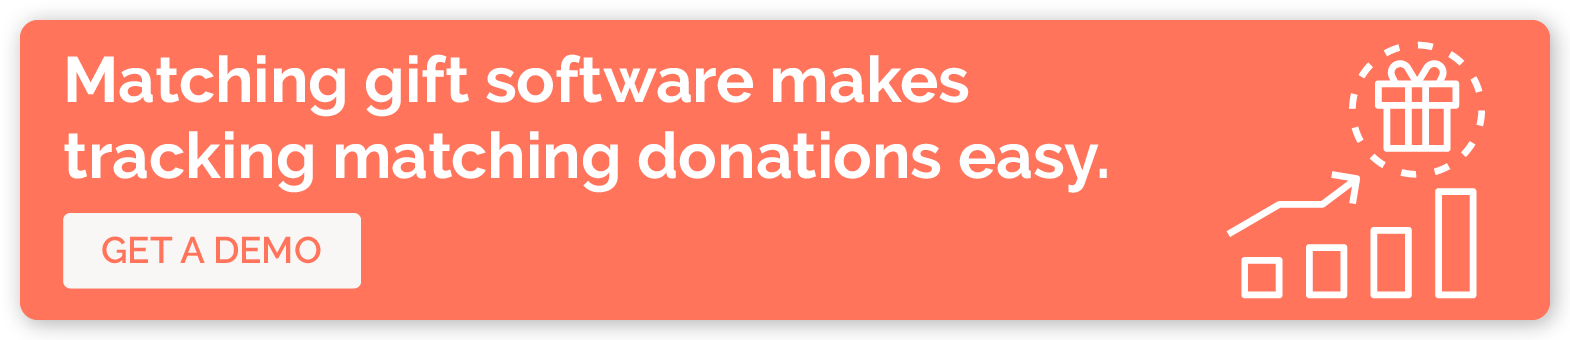 Click to get a demo of Double the Donation’s matching gift software for your matching donation challenge.